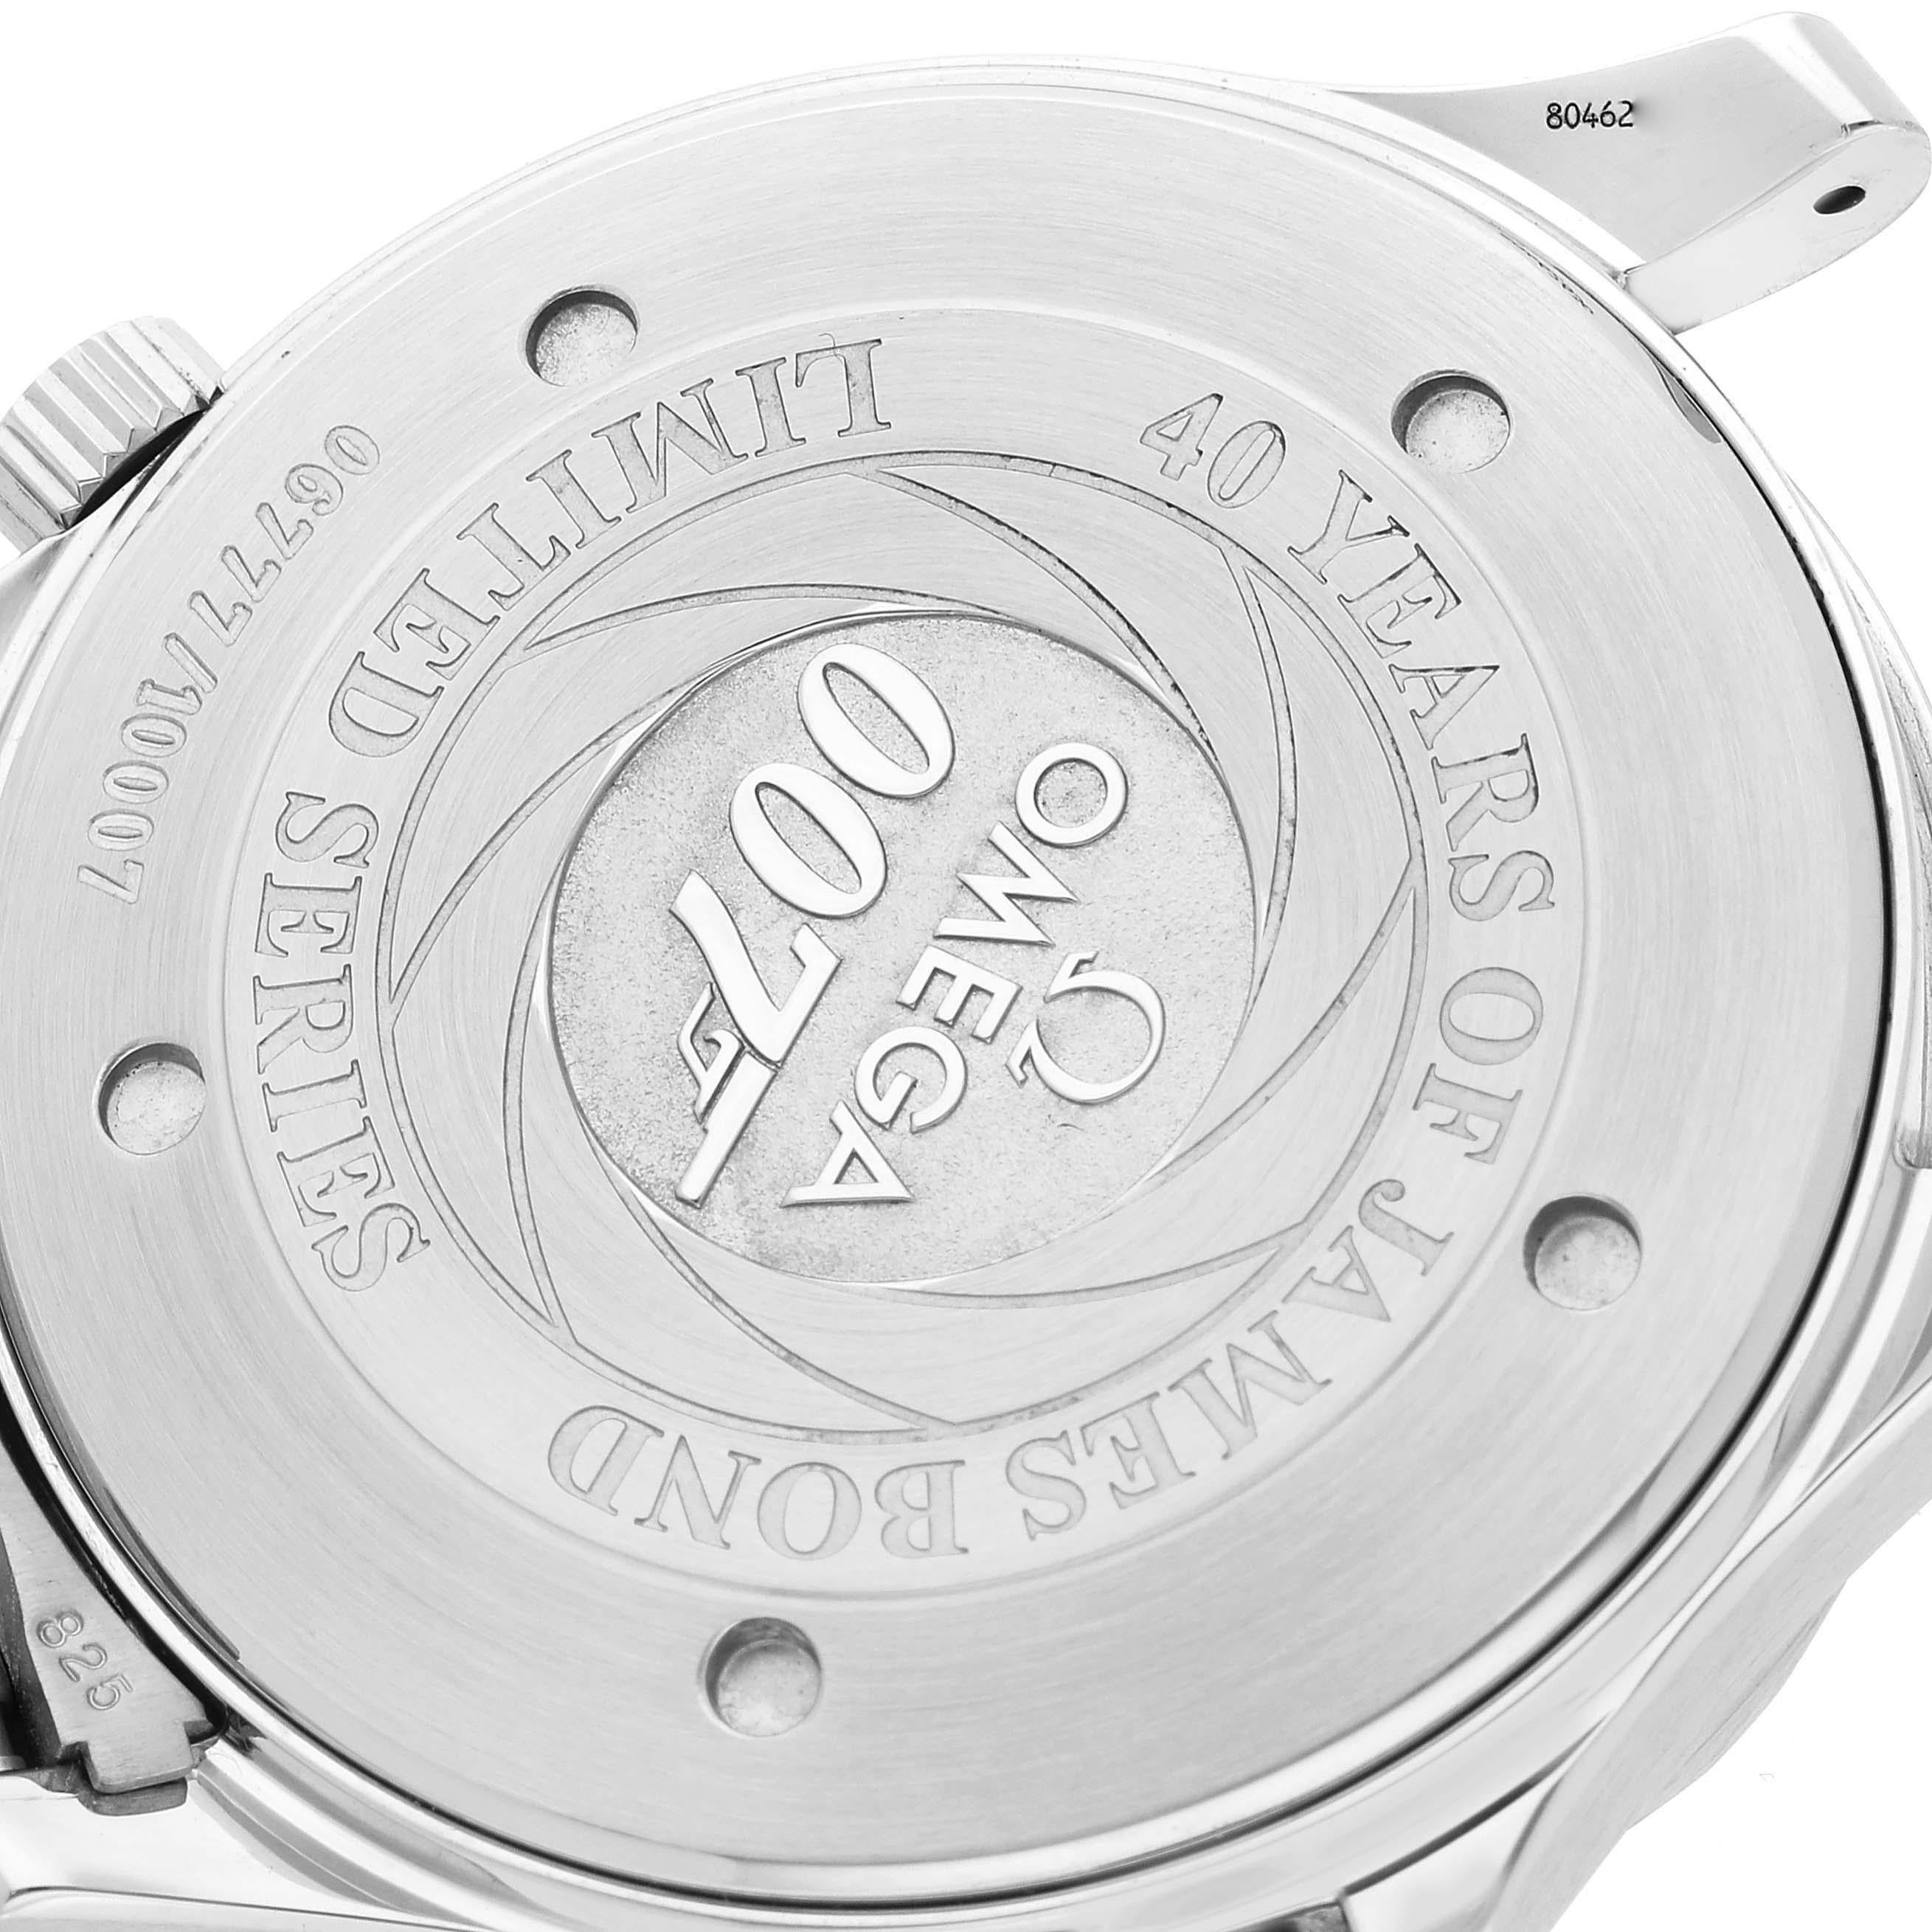 Omega Seamaster 40 Years James Bond Limited Edition Steel Mens Watch 2537.80.00 Box Card. Officially certified chronometer automatic self-winding movement. Brushed and polished stainless steel case 41.00 mm in diameter. Omega logo on a crown. Screw